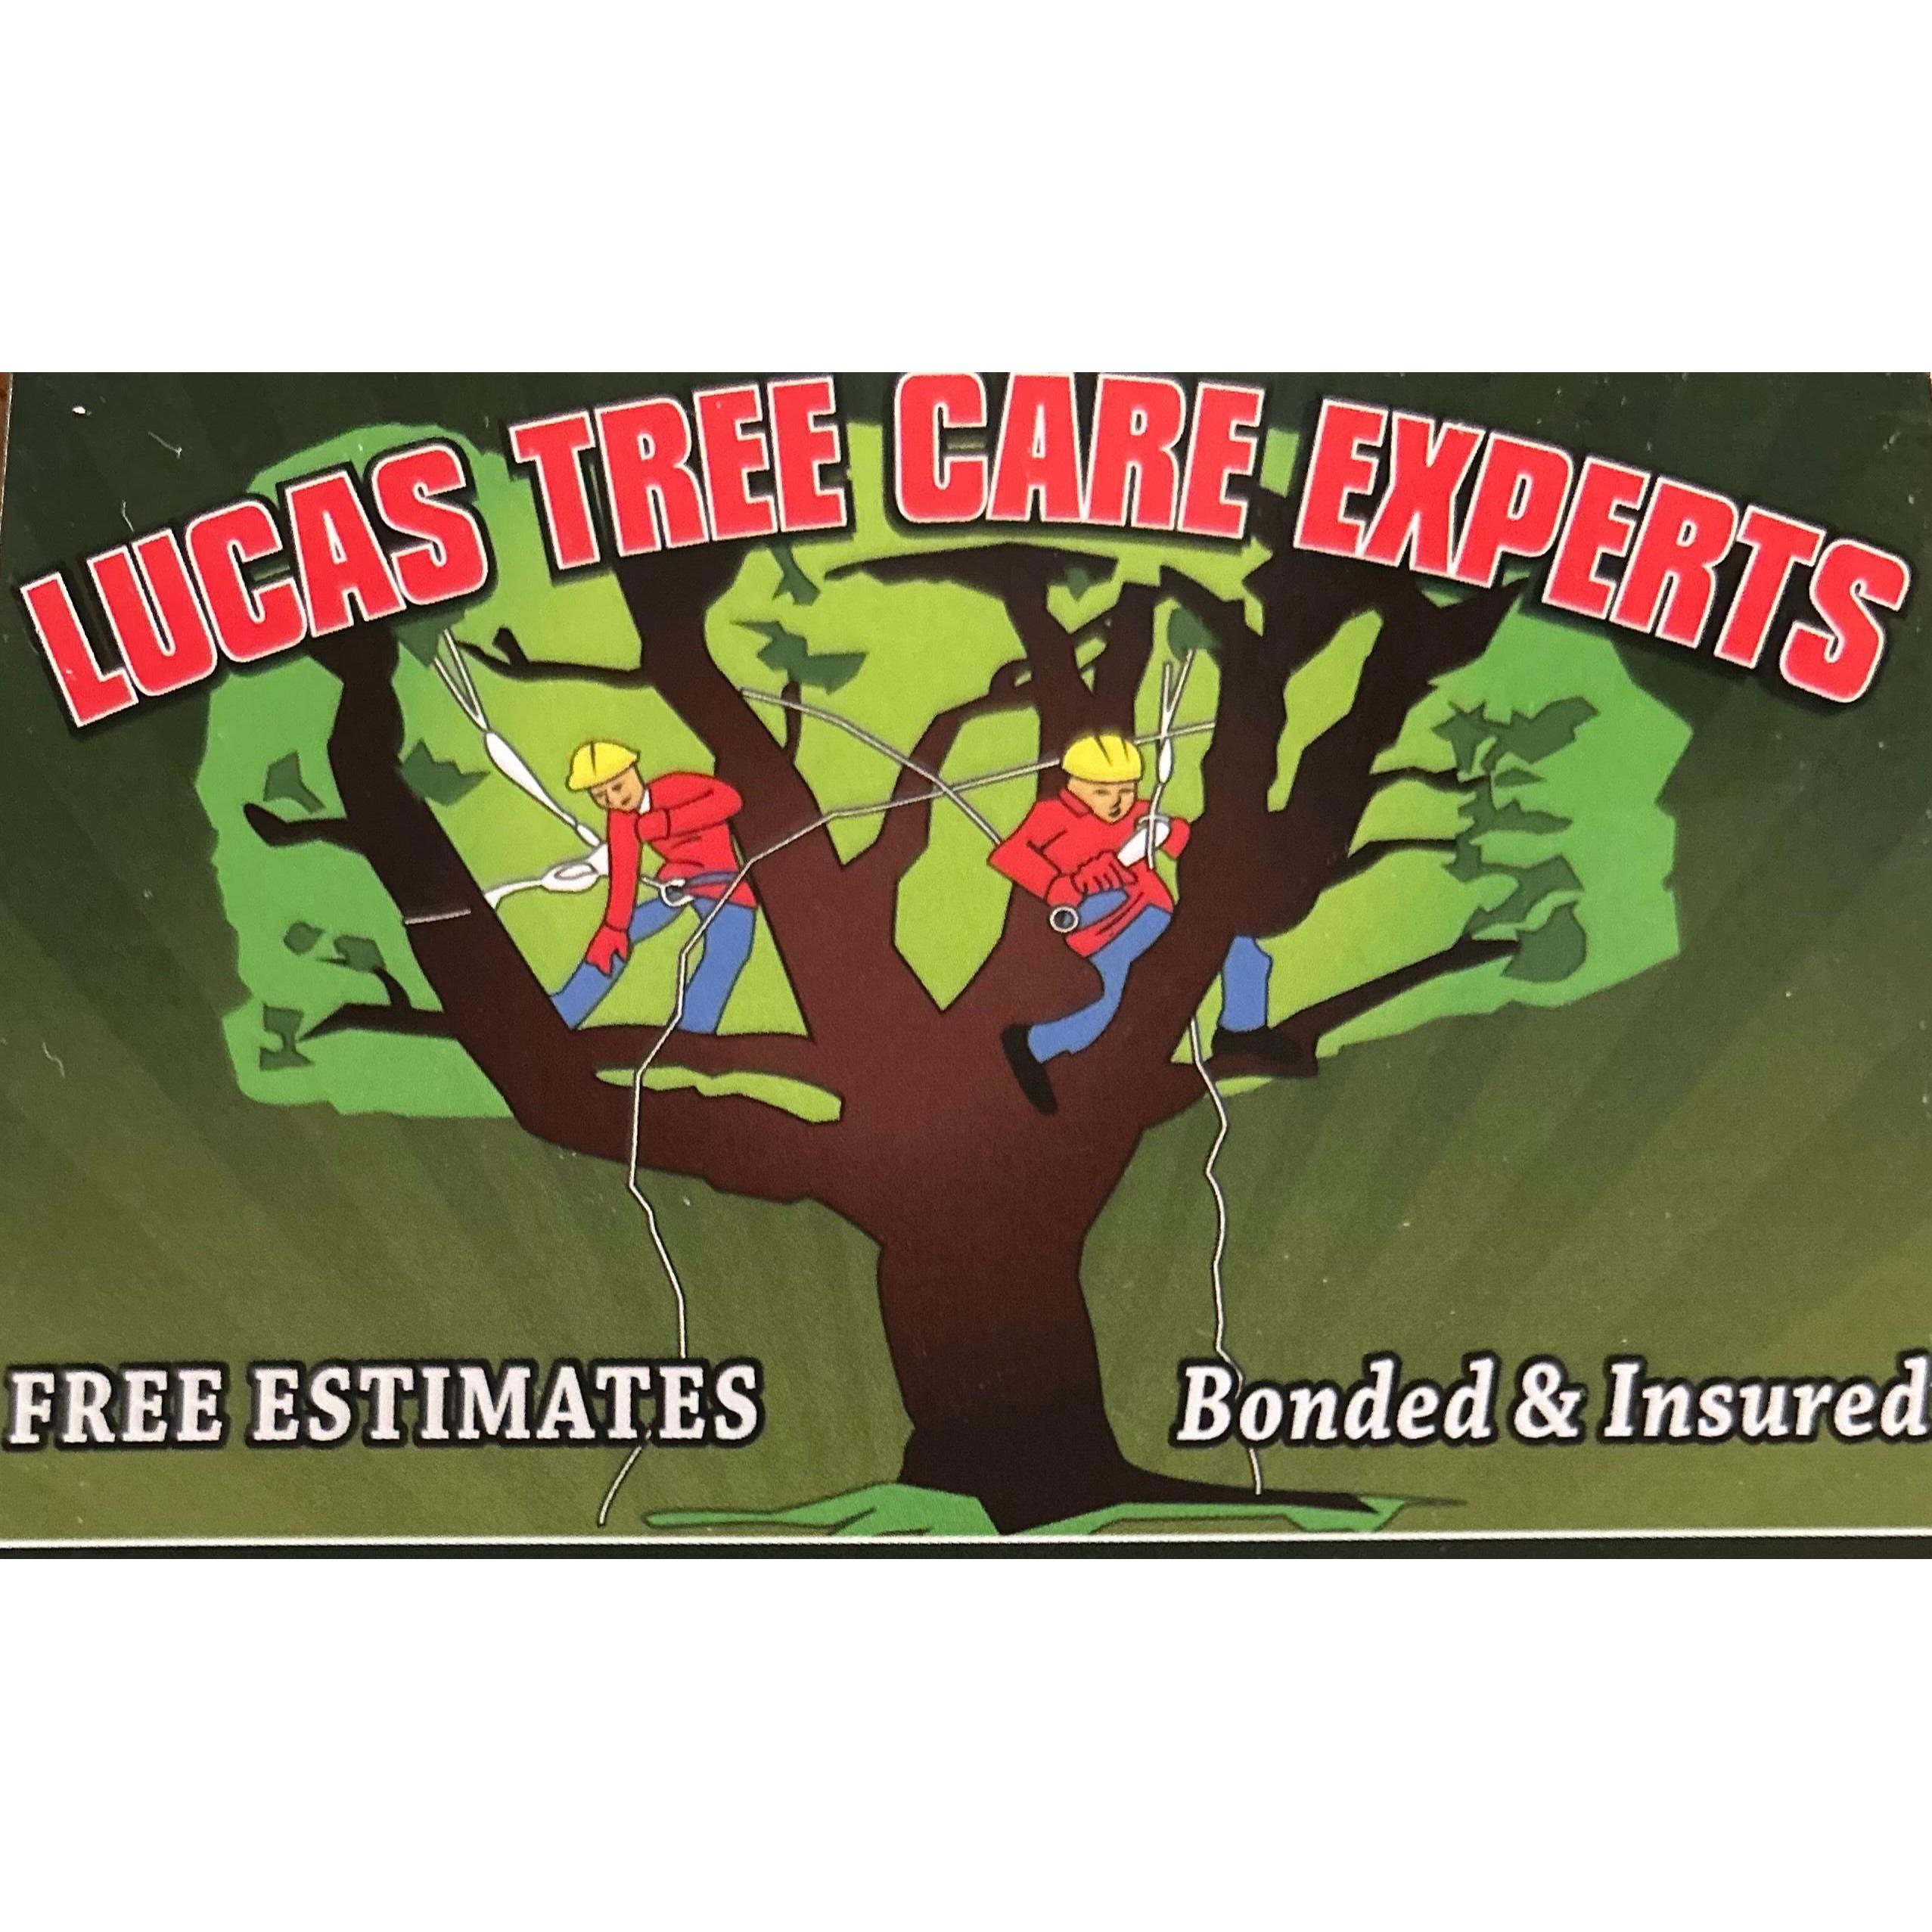 Lucas Tree Care Experts - Lombard, IL 60148 - (630)519-4206 | ShowMeLocal.com